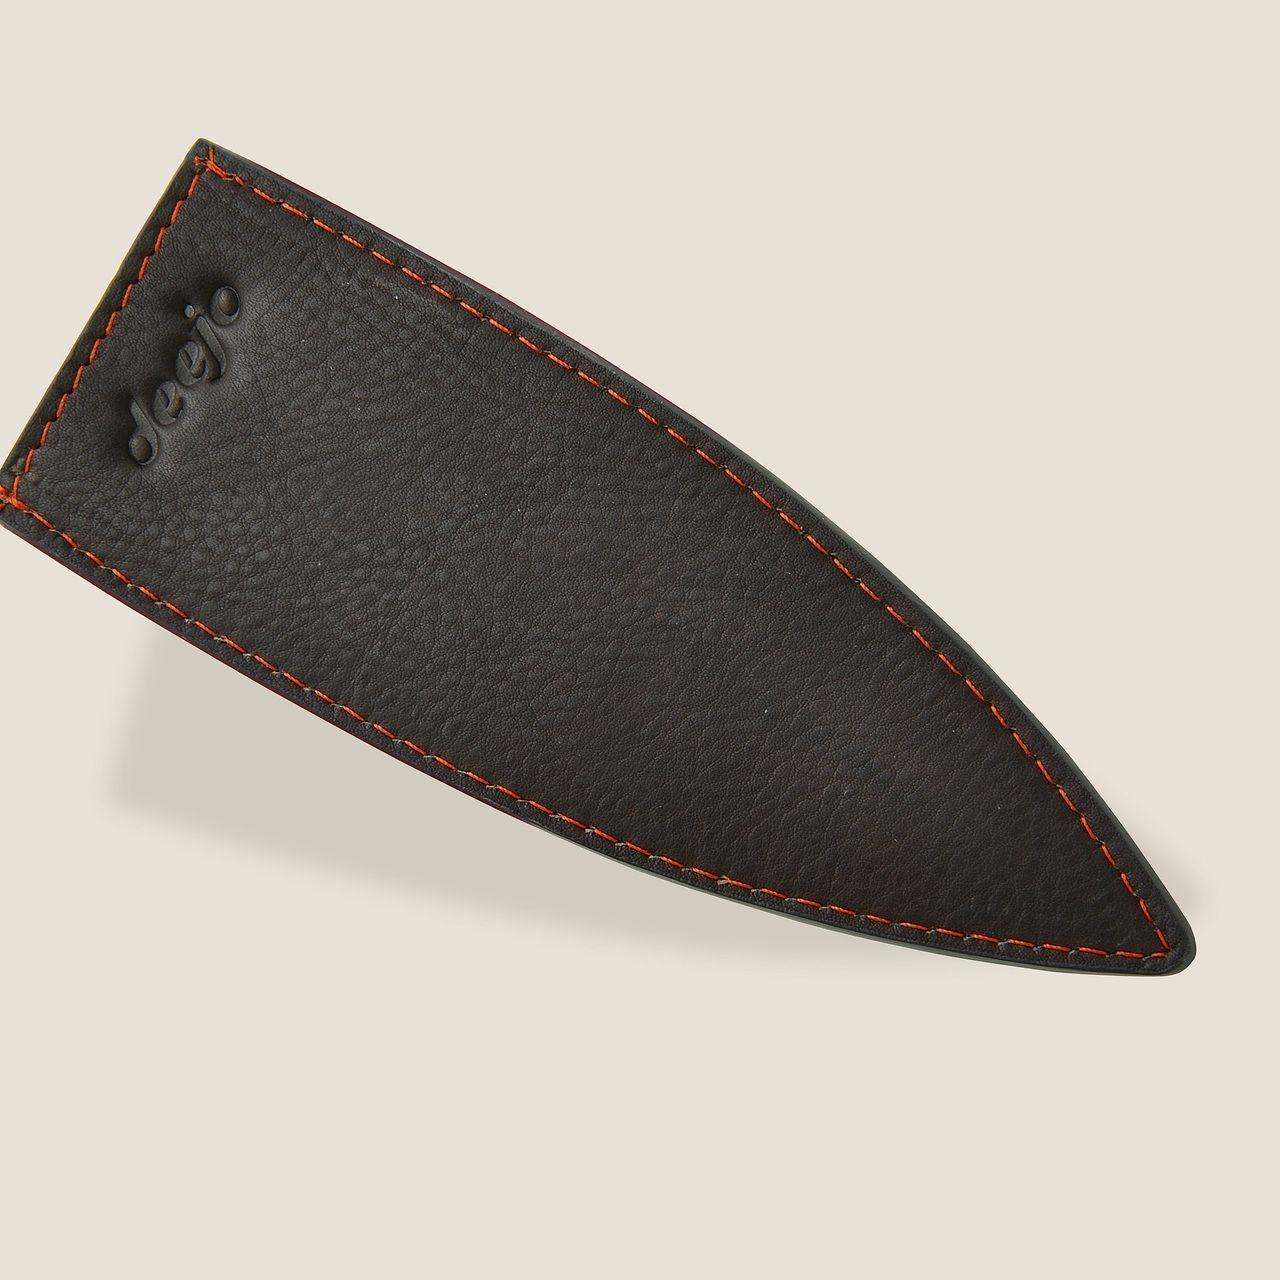 Deejo Leather Sheath for 37g, Mocca